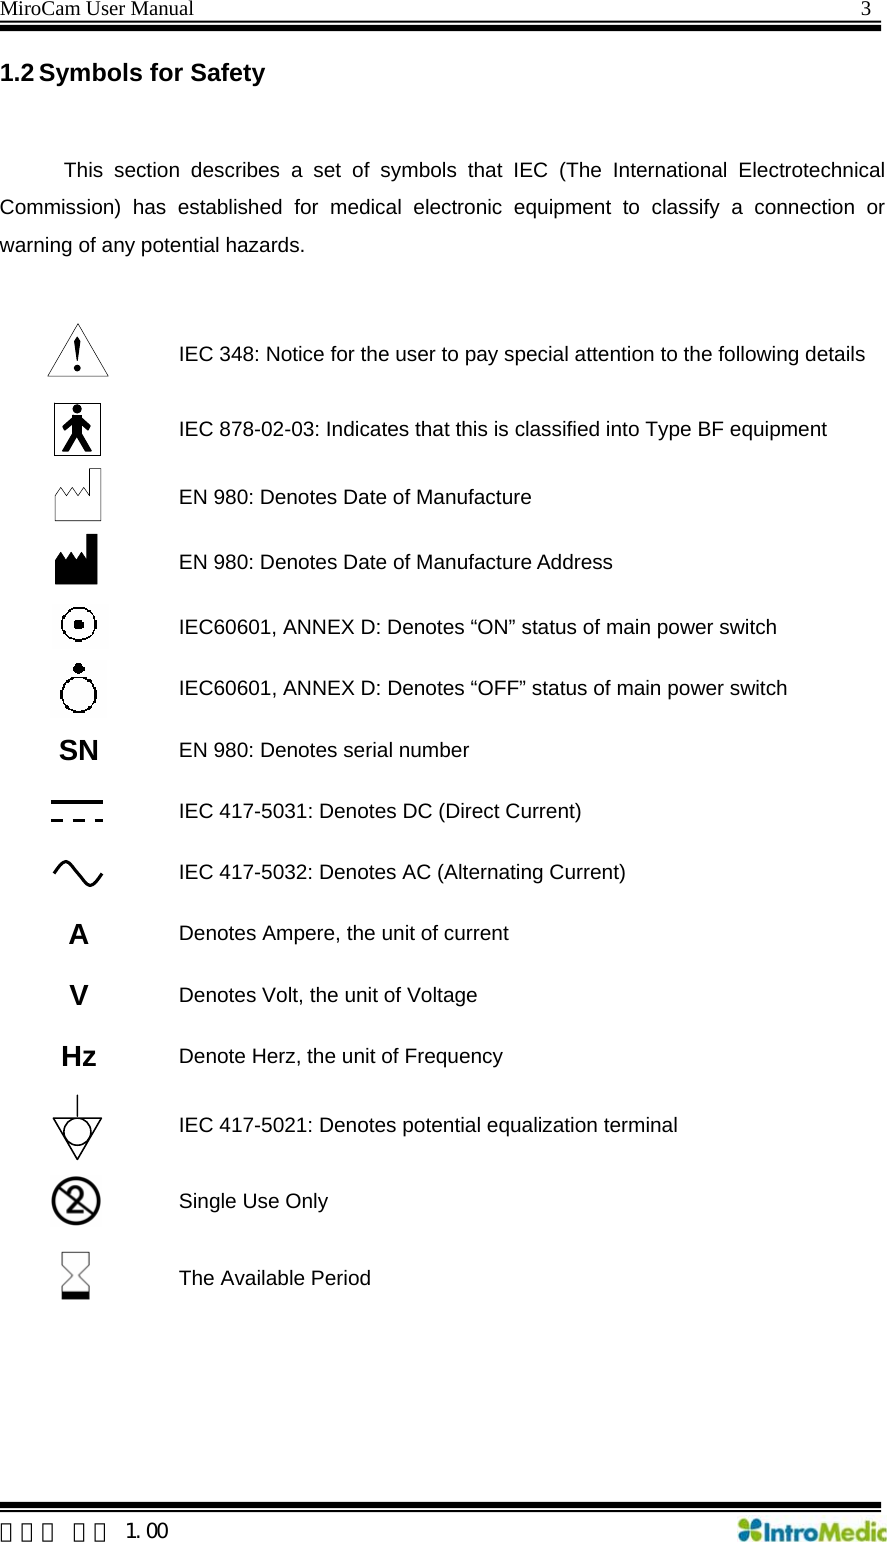 MiroCam User Manual                                                                3 1.2 Symbols for Safety  This section describes a set of symbols that IEC (The International Electrotechnical Commission) has established for medical electronic equipment to classify a connection or warning of any potential hazards.  IEC 348: Notice for the user to pay special attention to the following details   IEC 878-02-03: Indicates that this is classified into Type BF equipment  EN 980: Denotes Date of Manufacture EN 980: Denotes Date of Manufacture Address IEC60601, ANNEX D: Denotes “ON” status of main power switch IEC60601, ANNEX D: Denotes “OFF” status of main power switch SN  EN 980: Denotes serial number IEC 417-5031: Denotes DC (Direct Current) IEC 417-5032: Denotes AC (Alternating Current) A  Denotes Ampere, the unit of current V  Denotes Volt, the unit of Voltage Hz  Denote Herz, the unit of Frequency IEC 417-5021: Denotes potential equalization terminal Single Use Only The Available Period   한글판 버전 1.00 